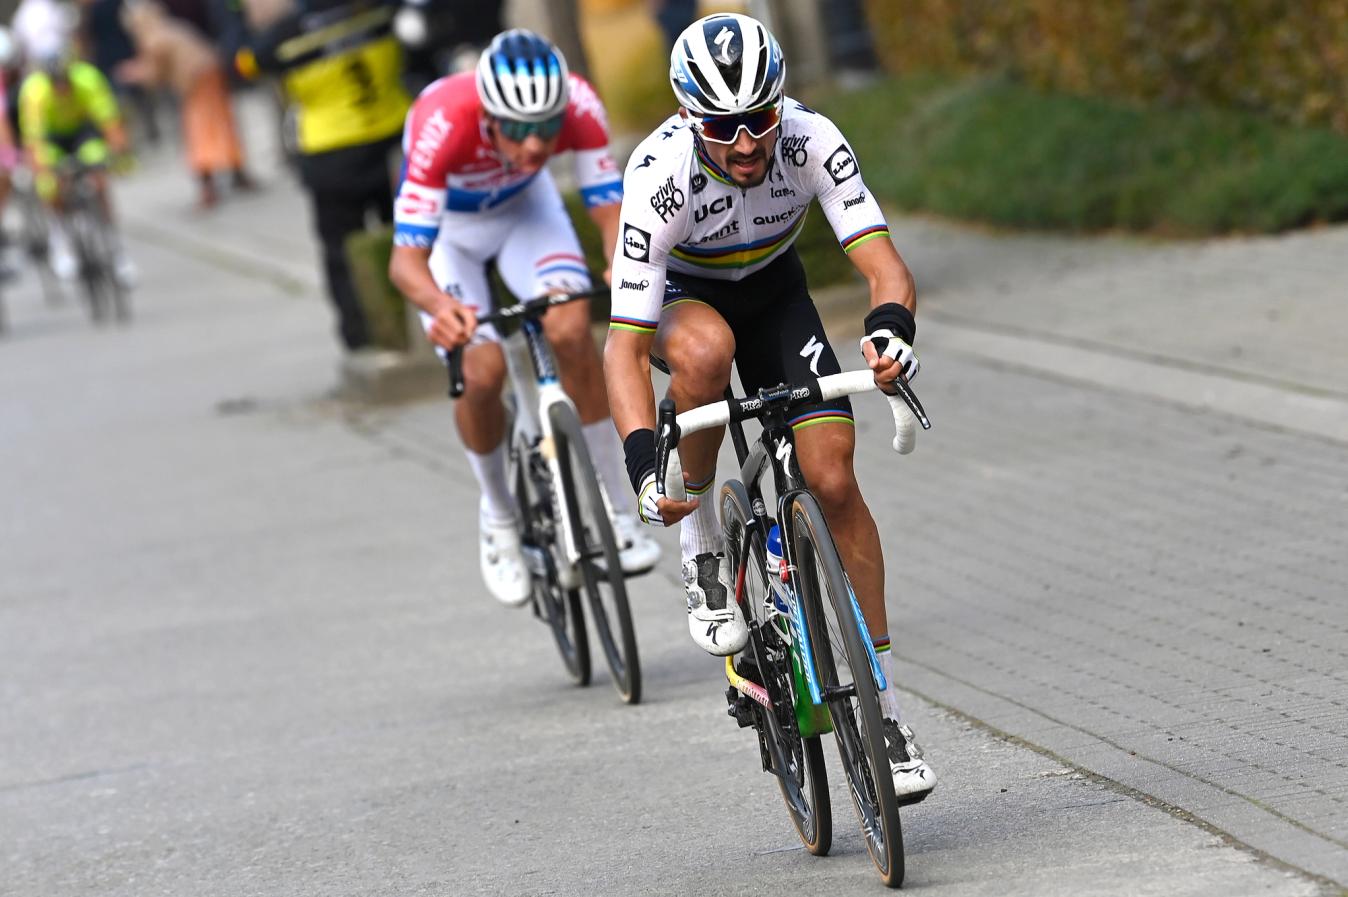 Julian Alaphilippe was a sensation on debut at the Tour of Flanders in 2020